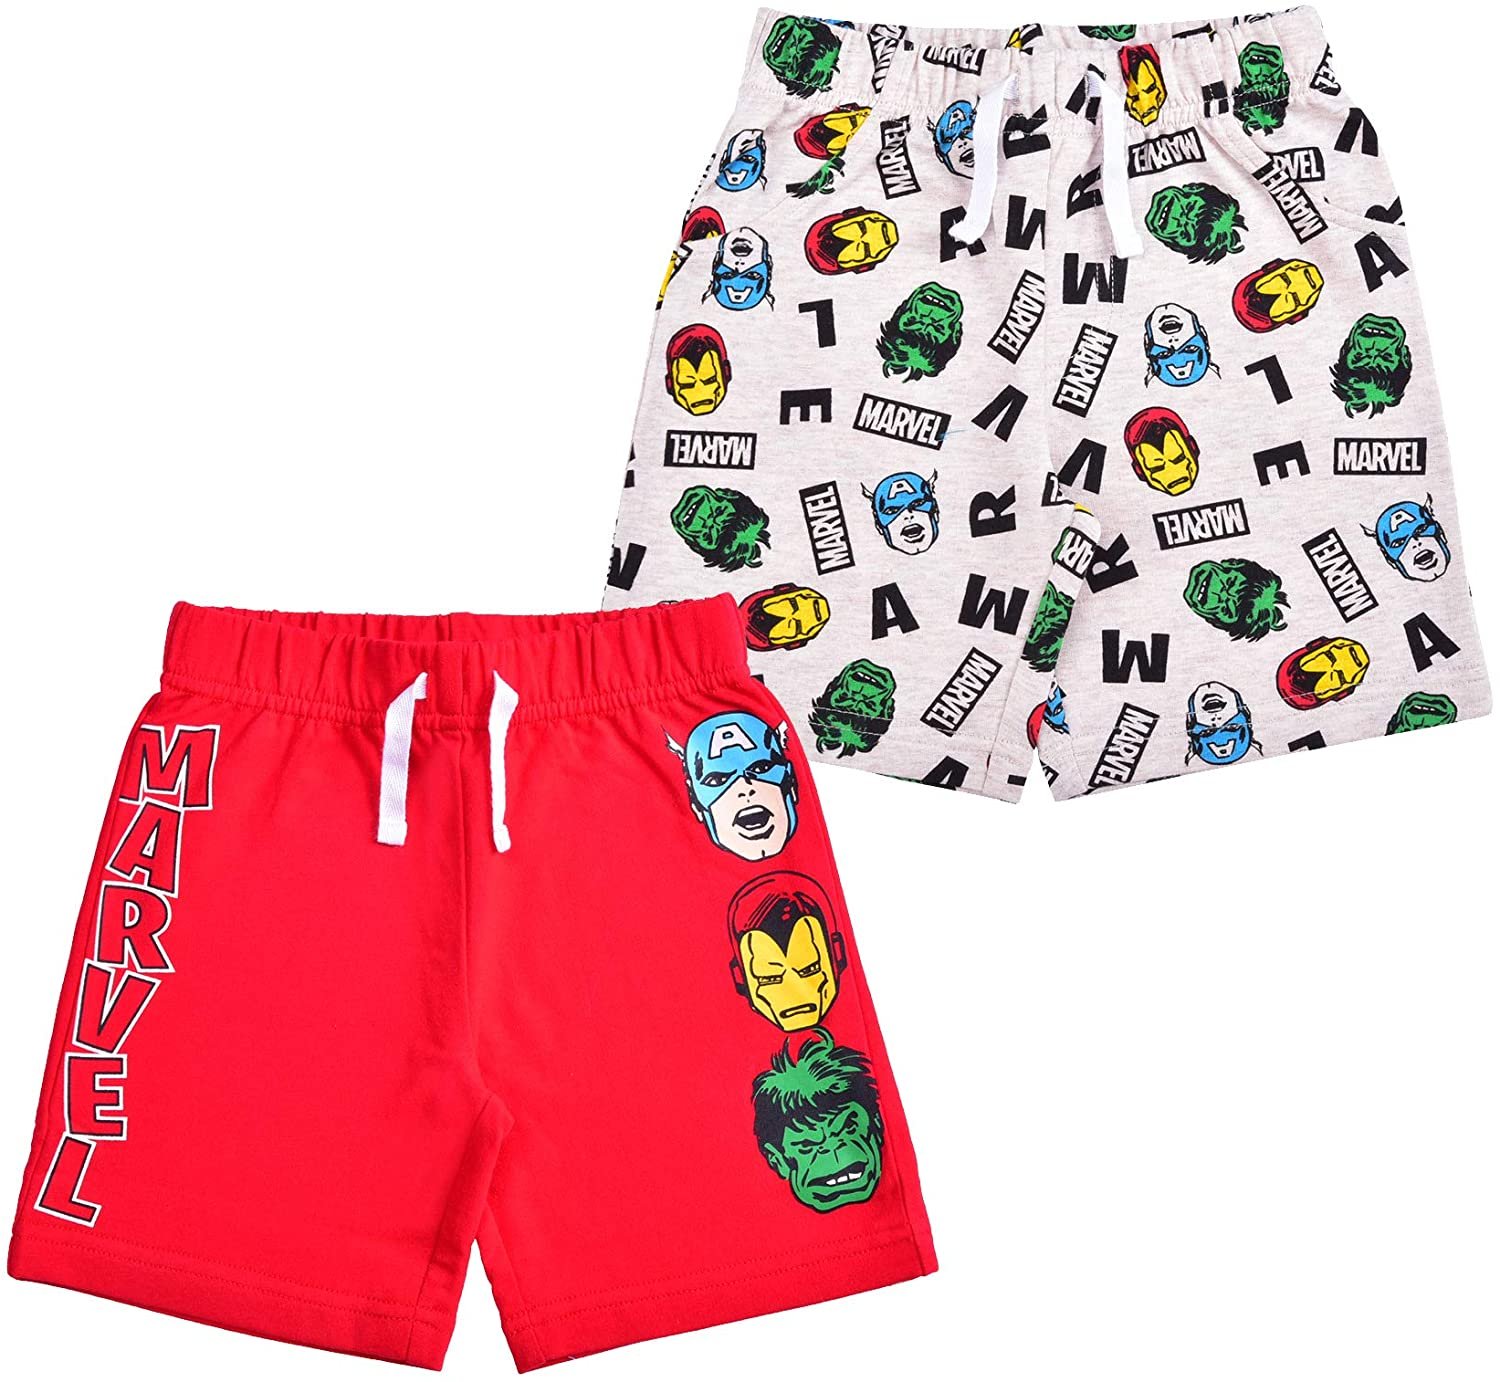 Marvel Superheroes 2 Pack Shorts Set for Boys, Ironman, Hulk and Captain America - image 1 of 5